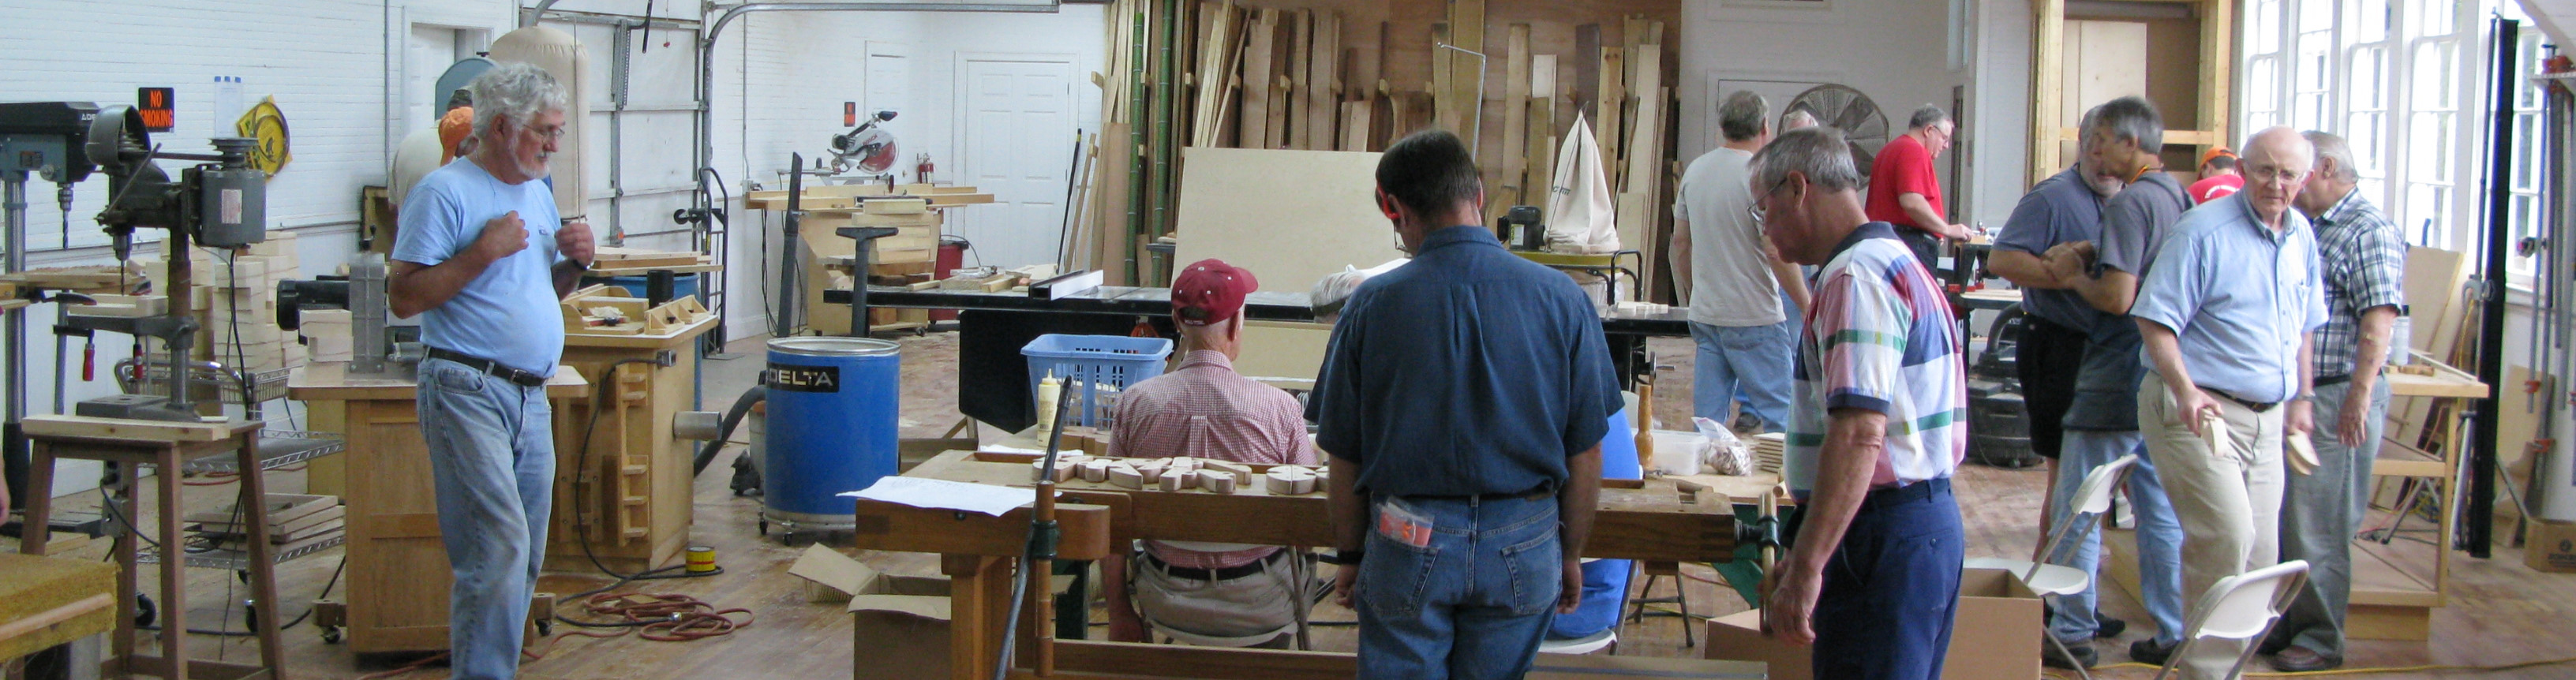 About Alabama Woodworkers Guild Inc.